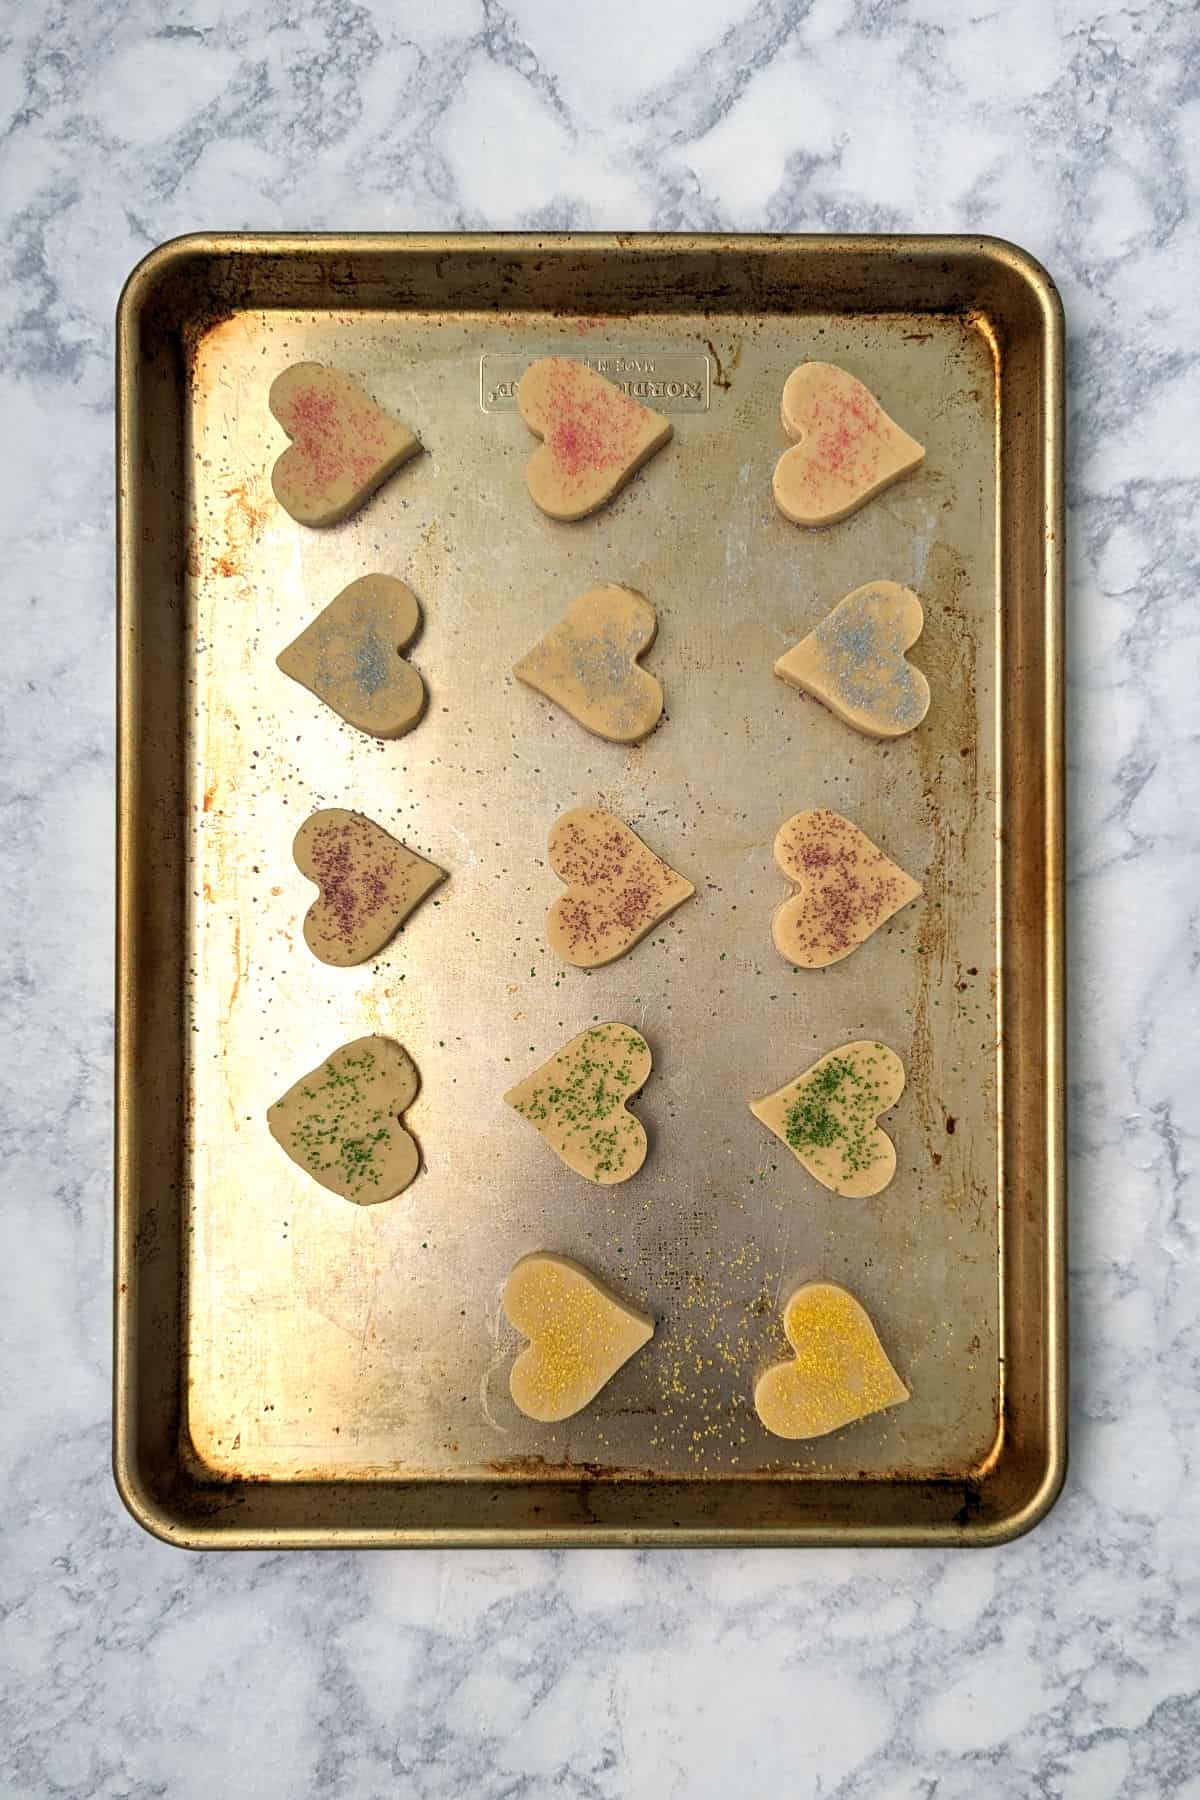 shortbread cookie dough shapes, on a half sheet pan, before baking